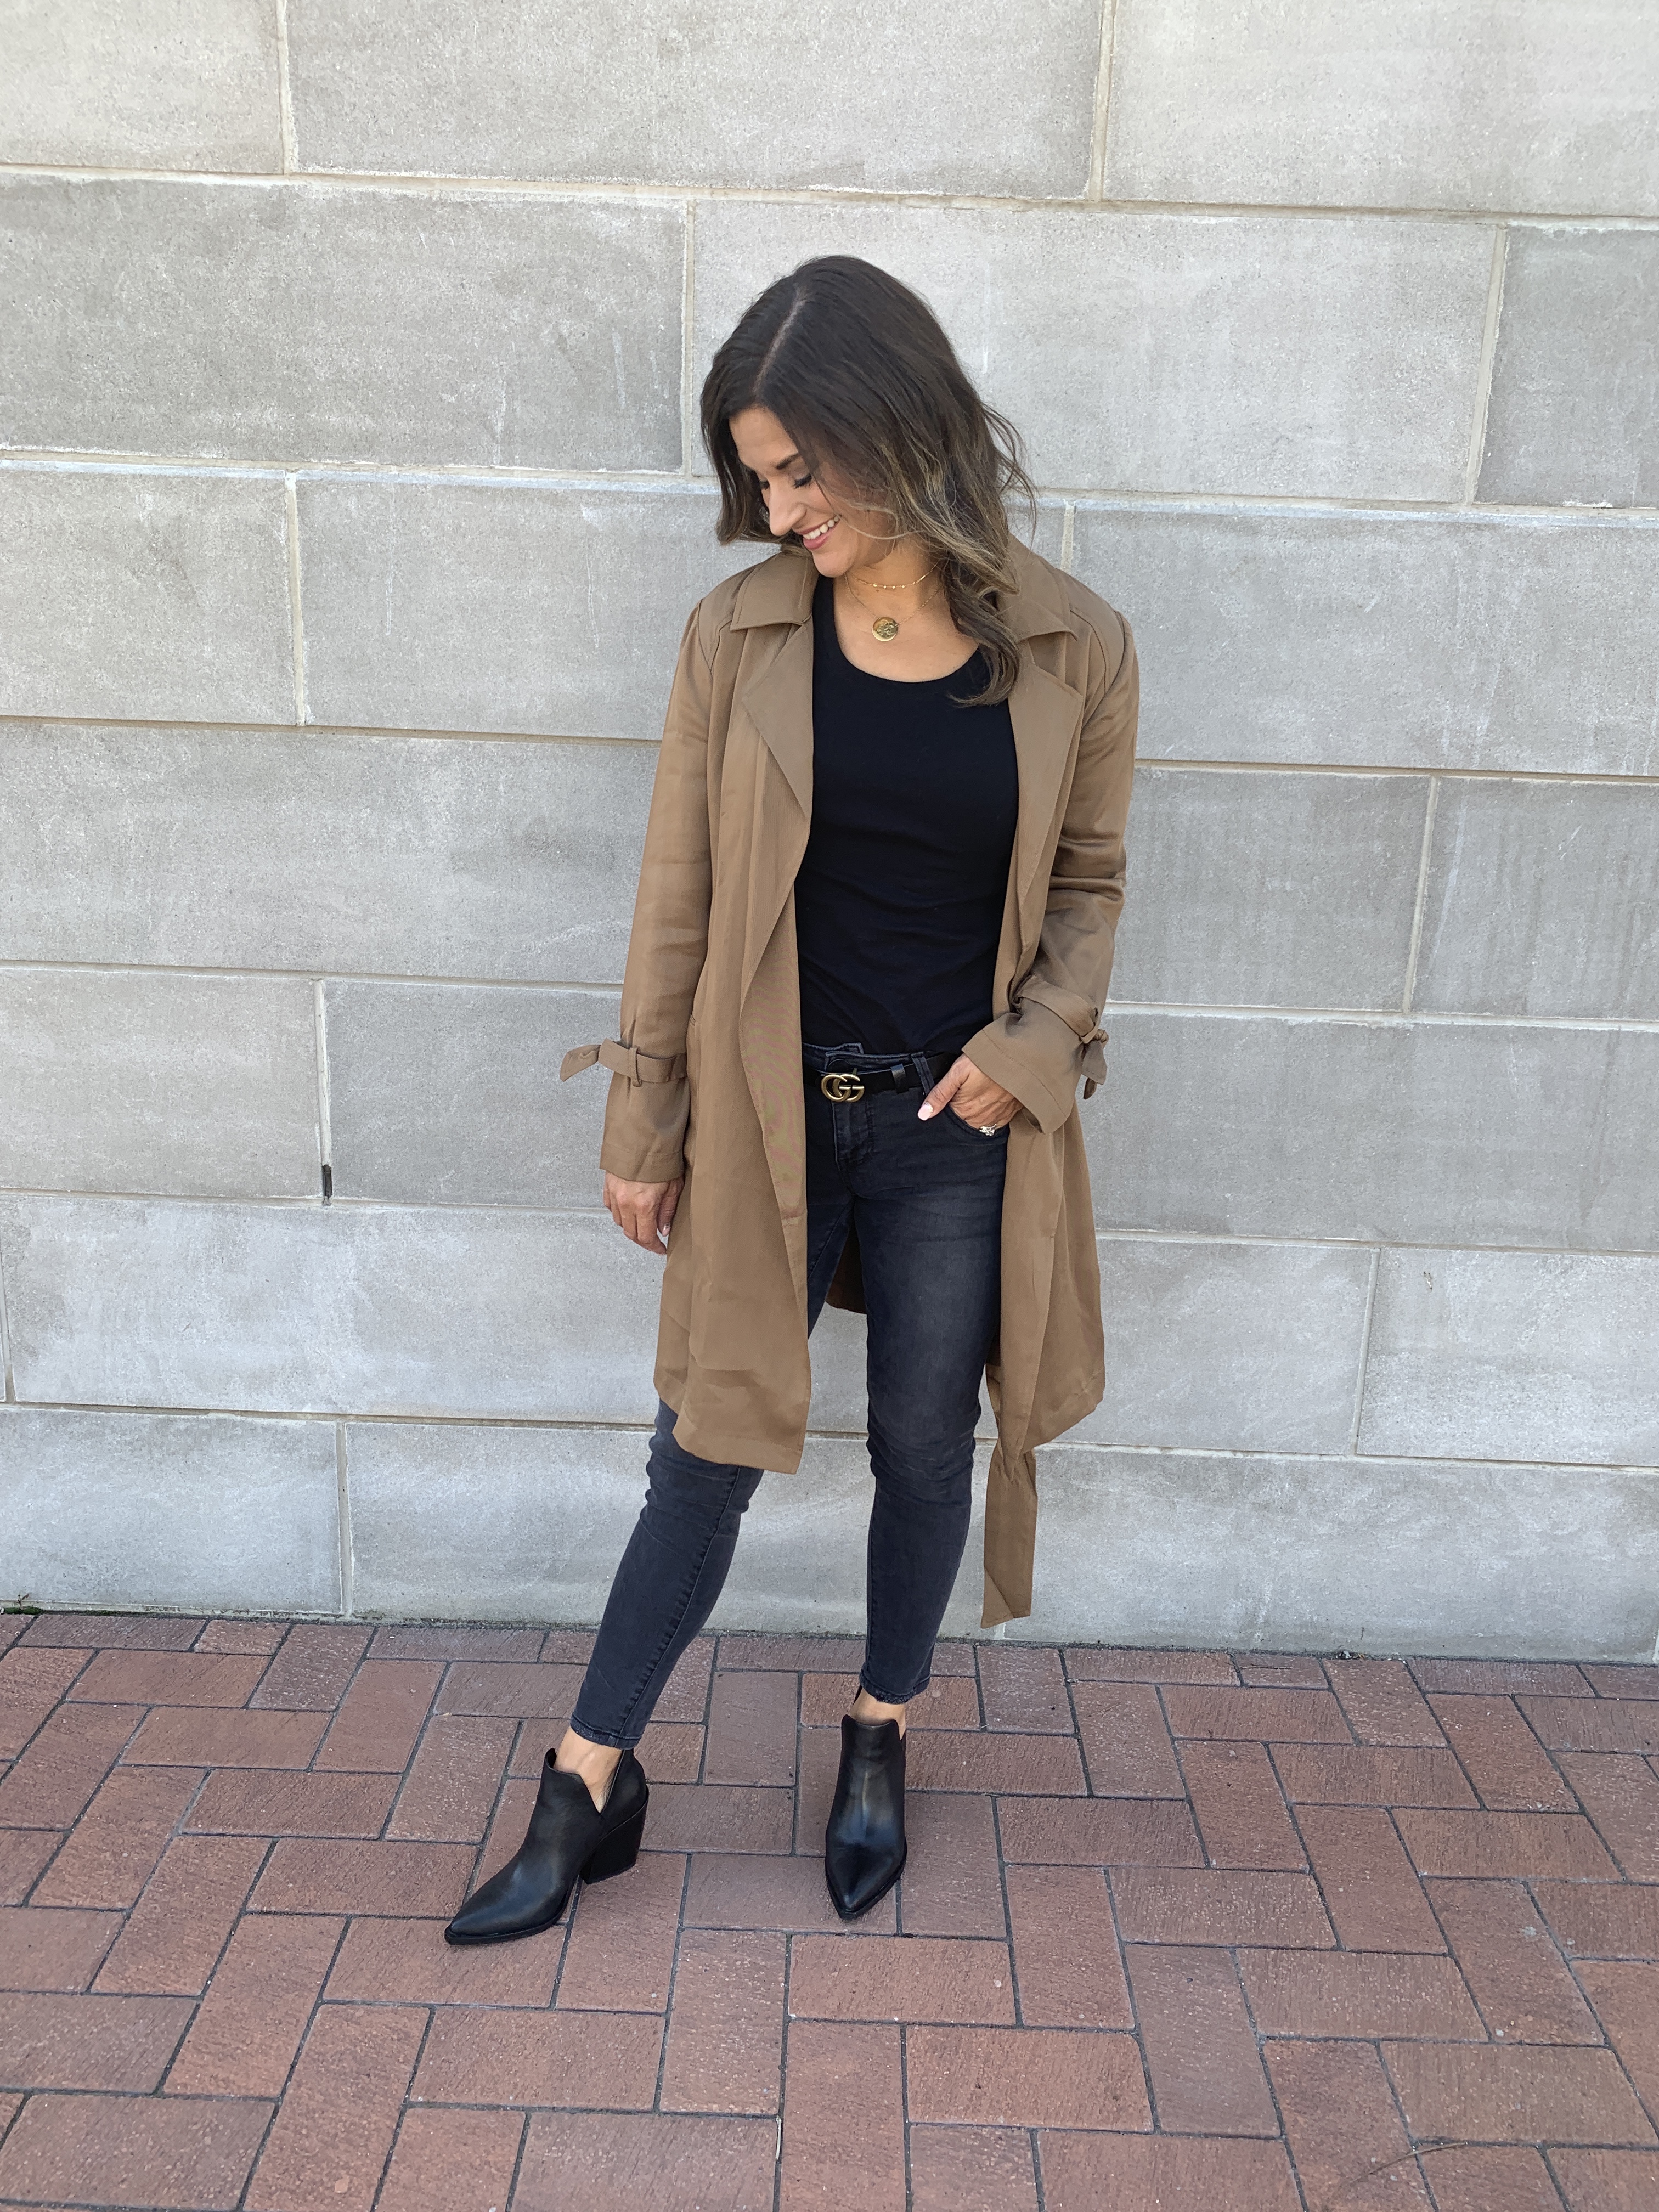 How to Wear Neutrals this Fall & Winter – Just Posted